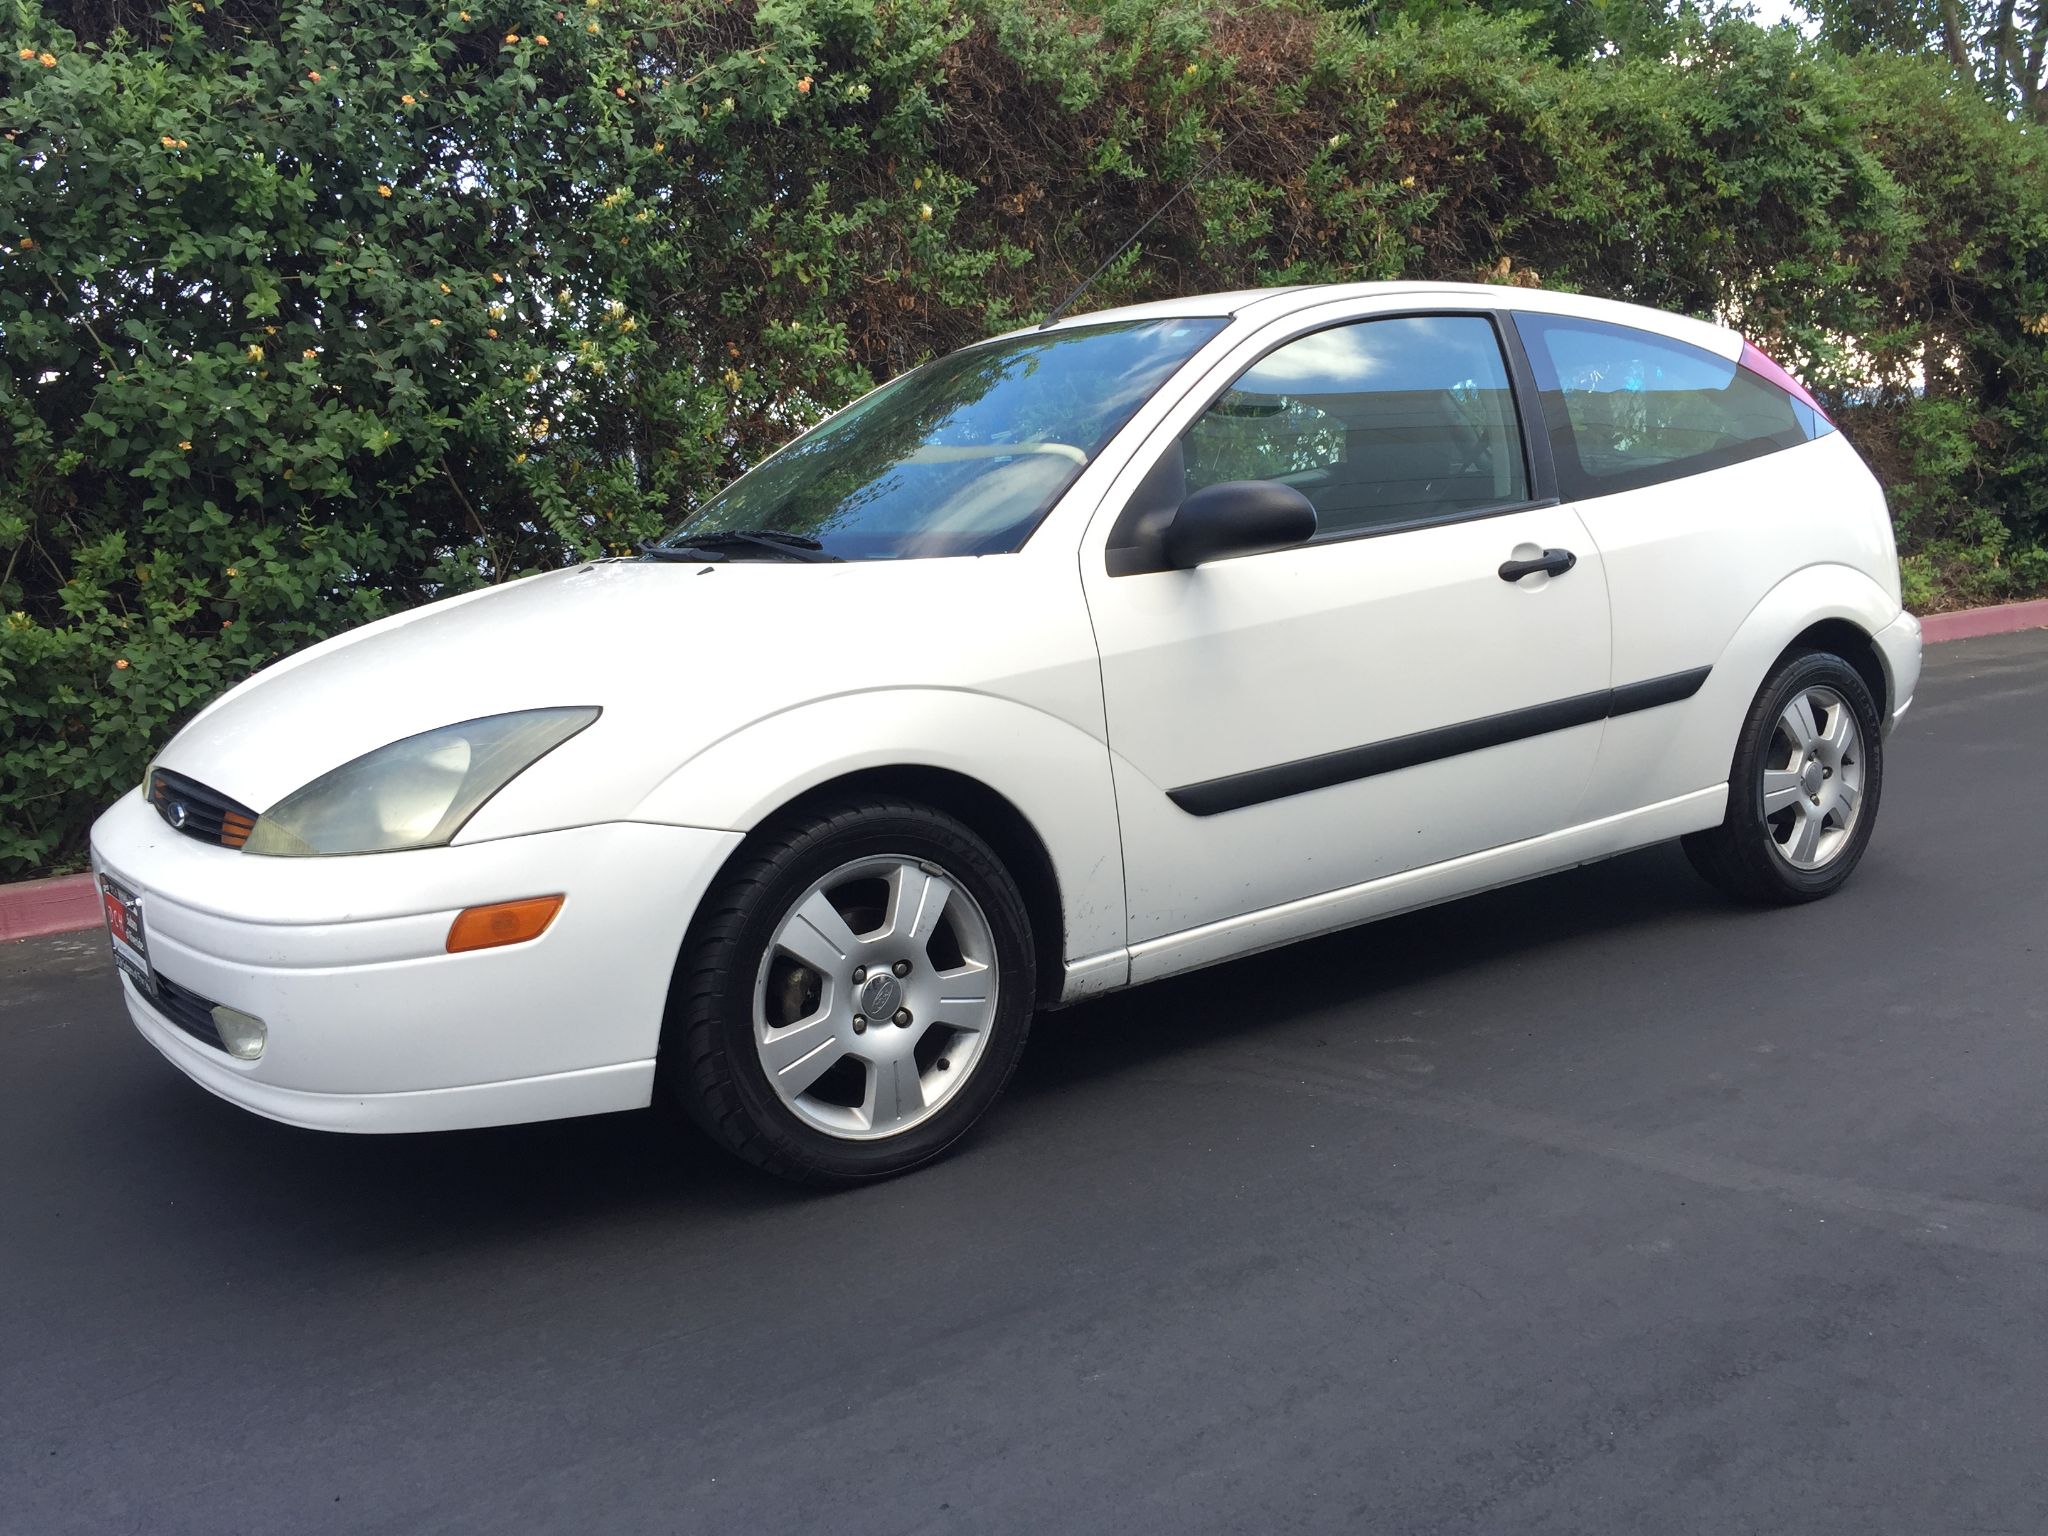 Used 2003 Ford Focus ZX3 Premium at City Cars Warehouse INC